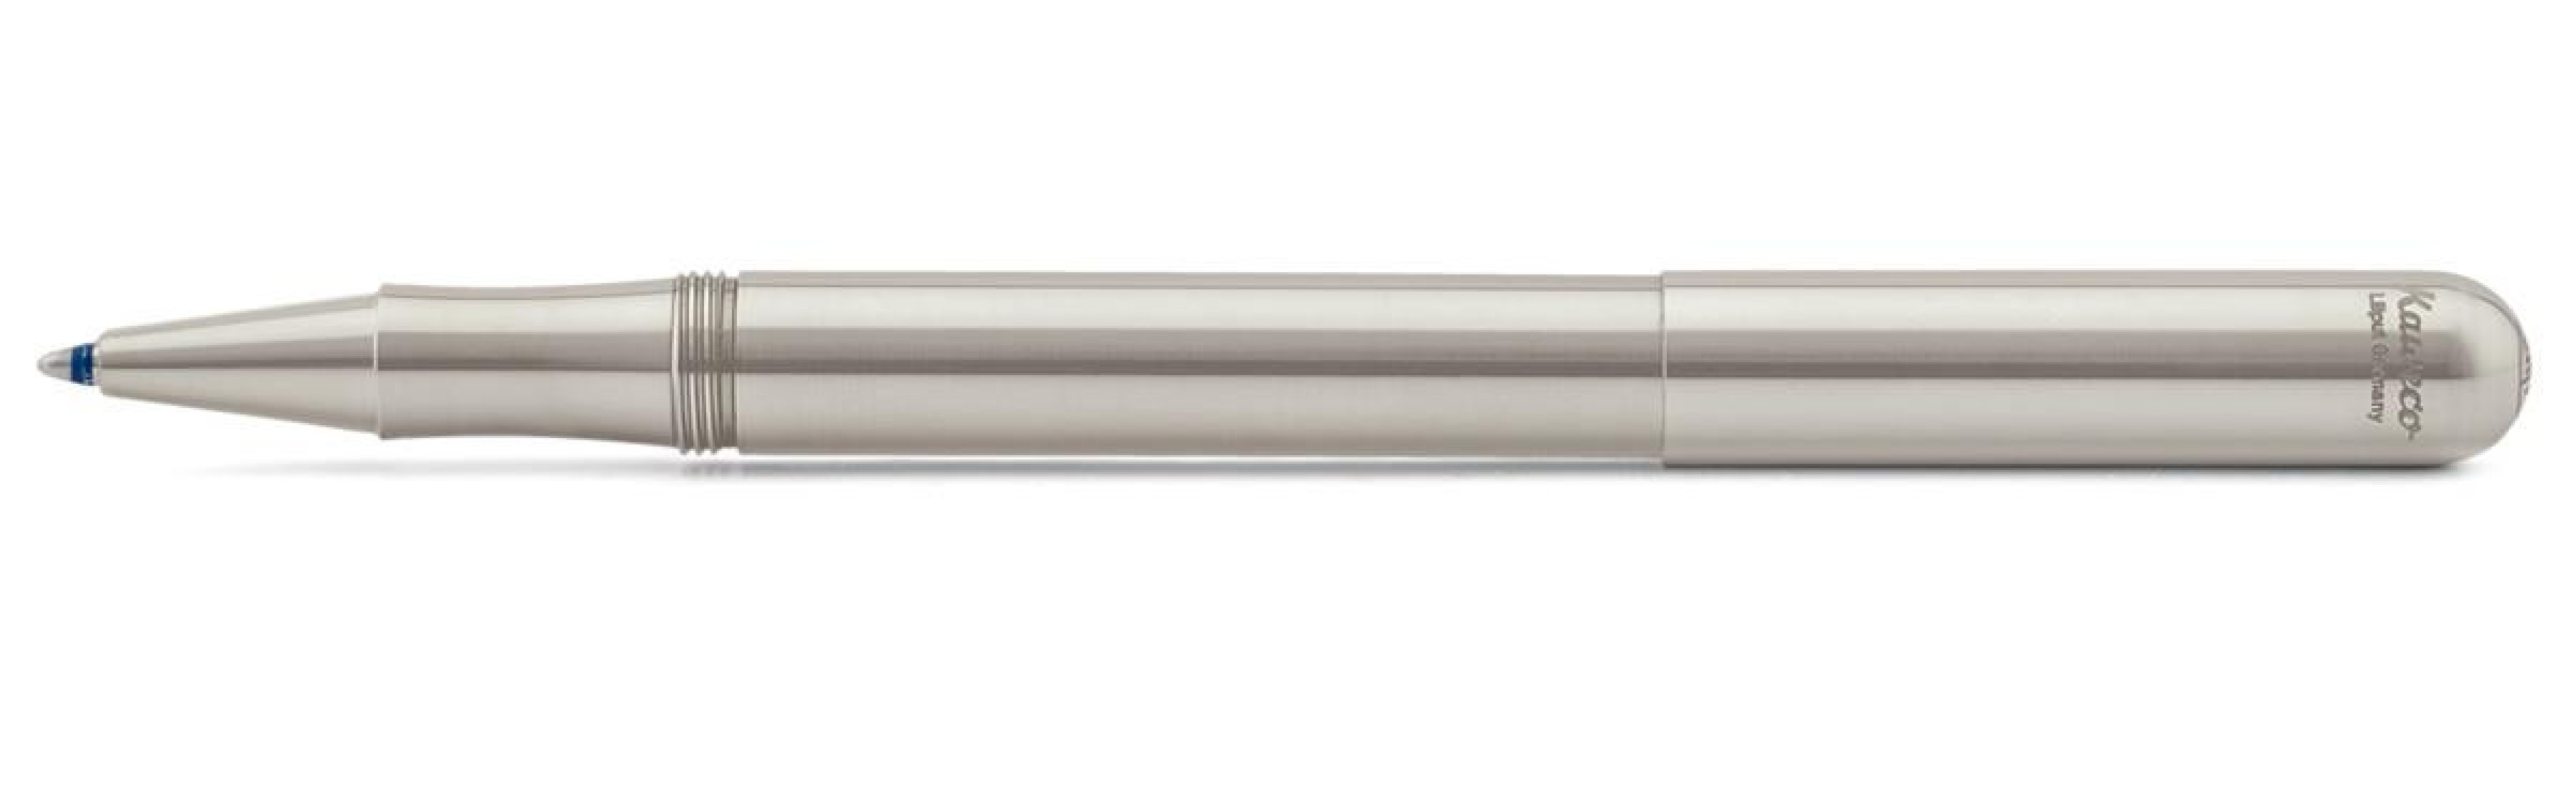 Kaweco Liliput Stainless Steel Ballpen with cap